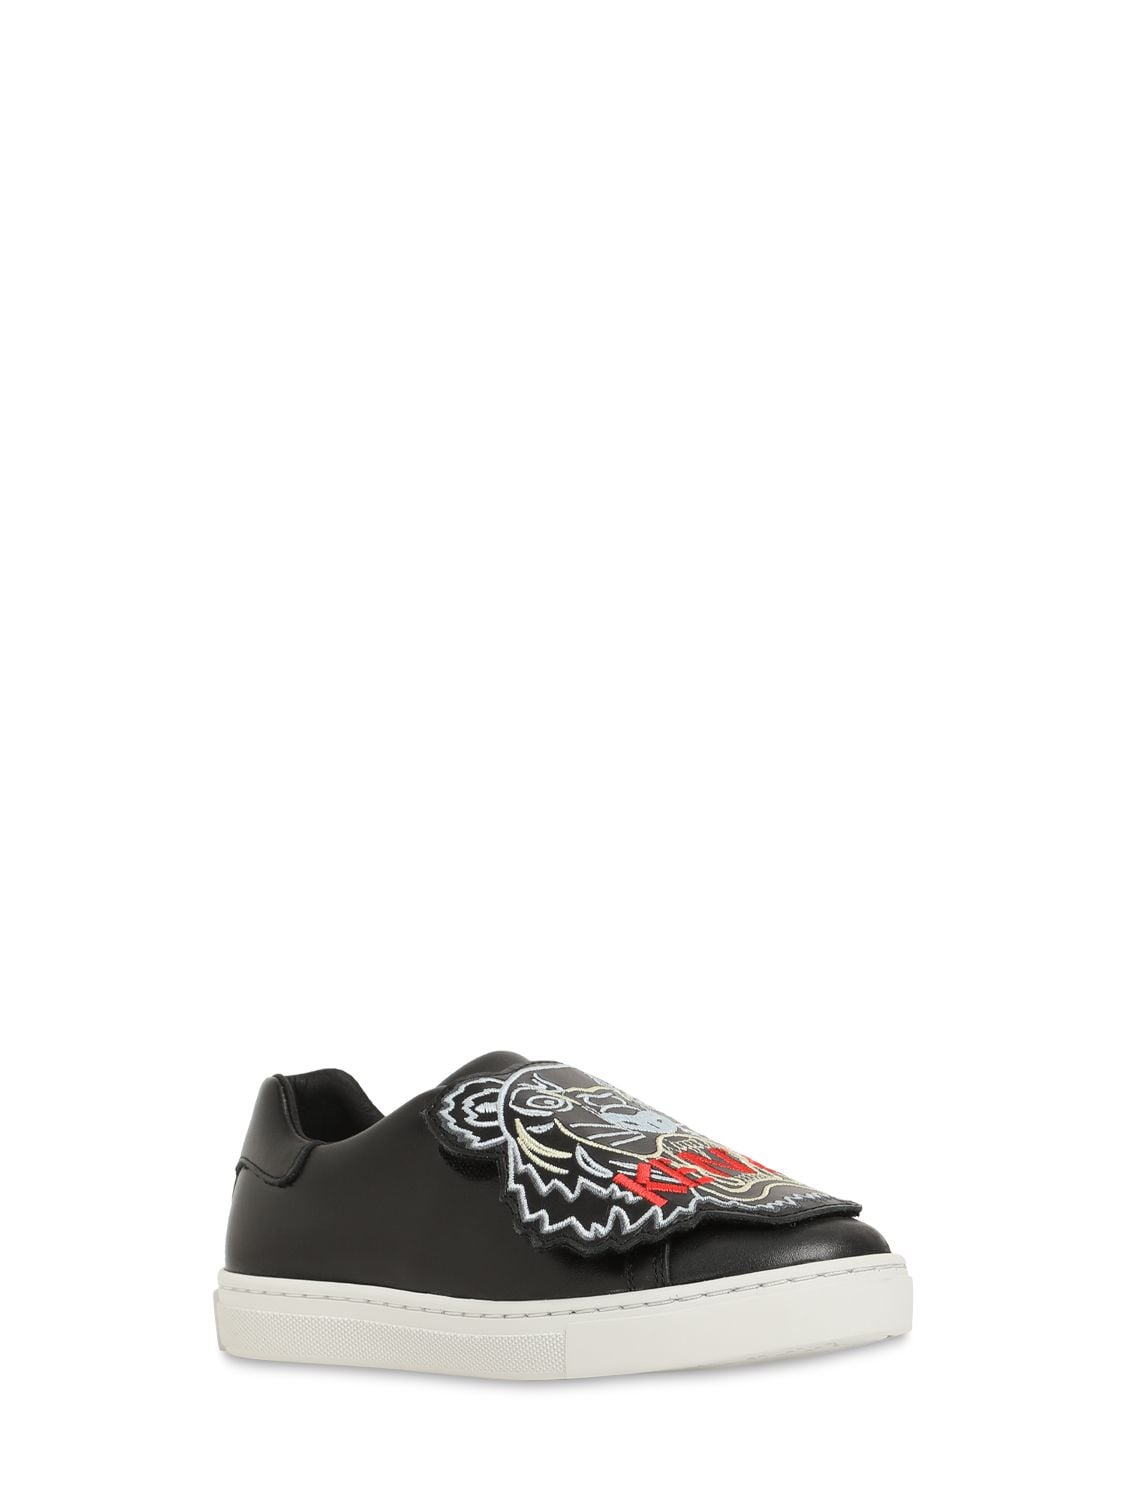 KENZO EMBROIDERED LEATHER SLIP-ON SNEAKERS,75I6TC098-MDLC0